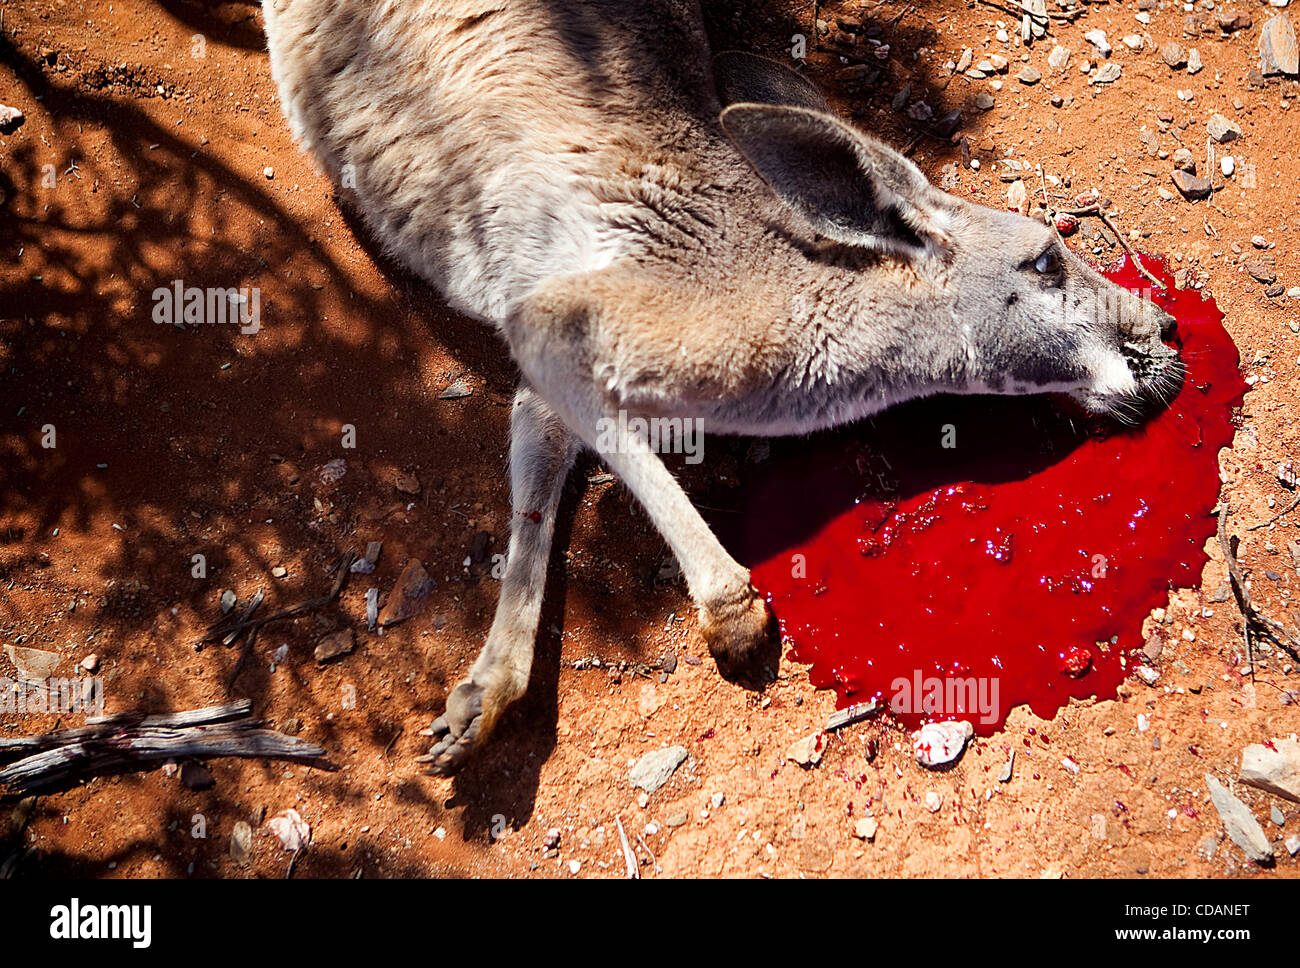 A recently-shot grey kangaroo lies in the dirt ready to be picked up by an Aboriginal hunter.  Kangaroos have long been a staple food for Indigenous Australians and are considered to be a lean and healthy meat.  Research has shown that when Indigenous people adhere to a traditional low-fat, high-pro Stock Photo